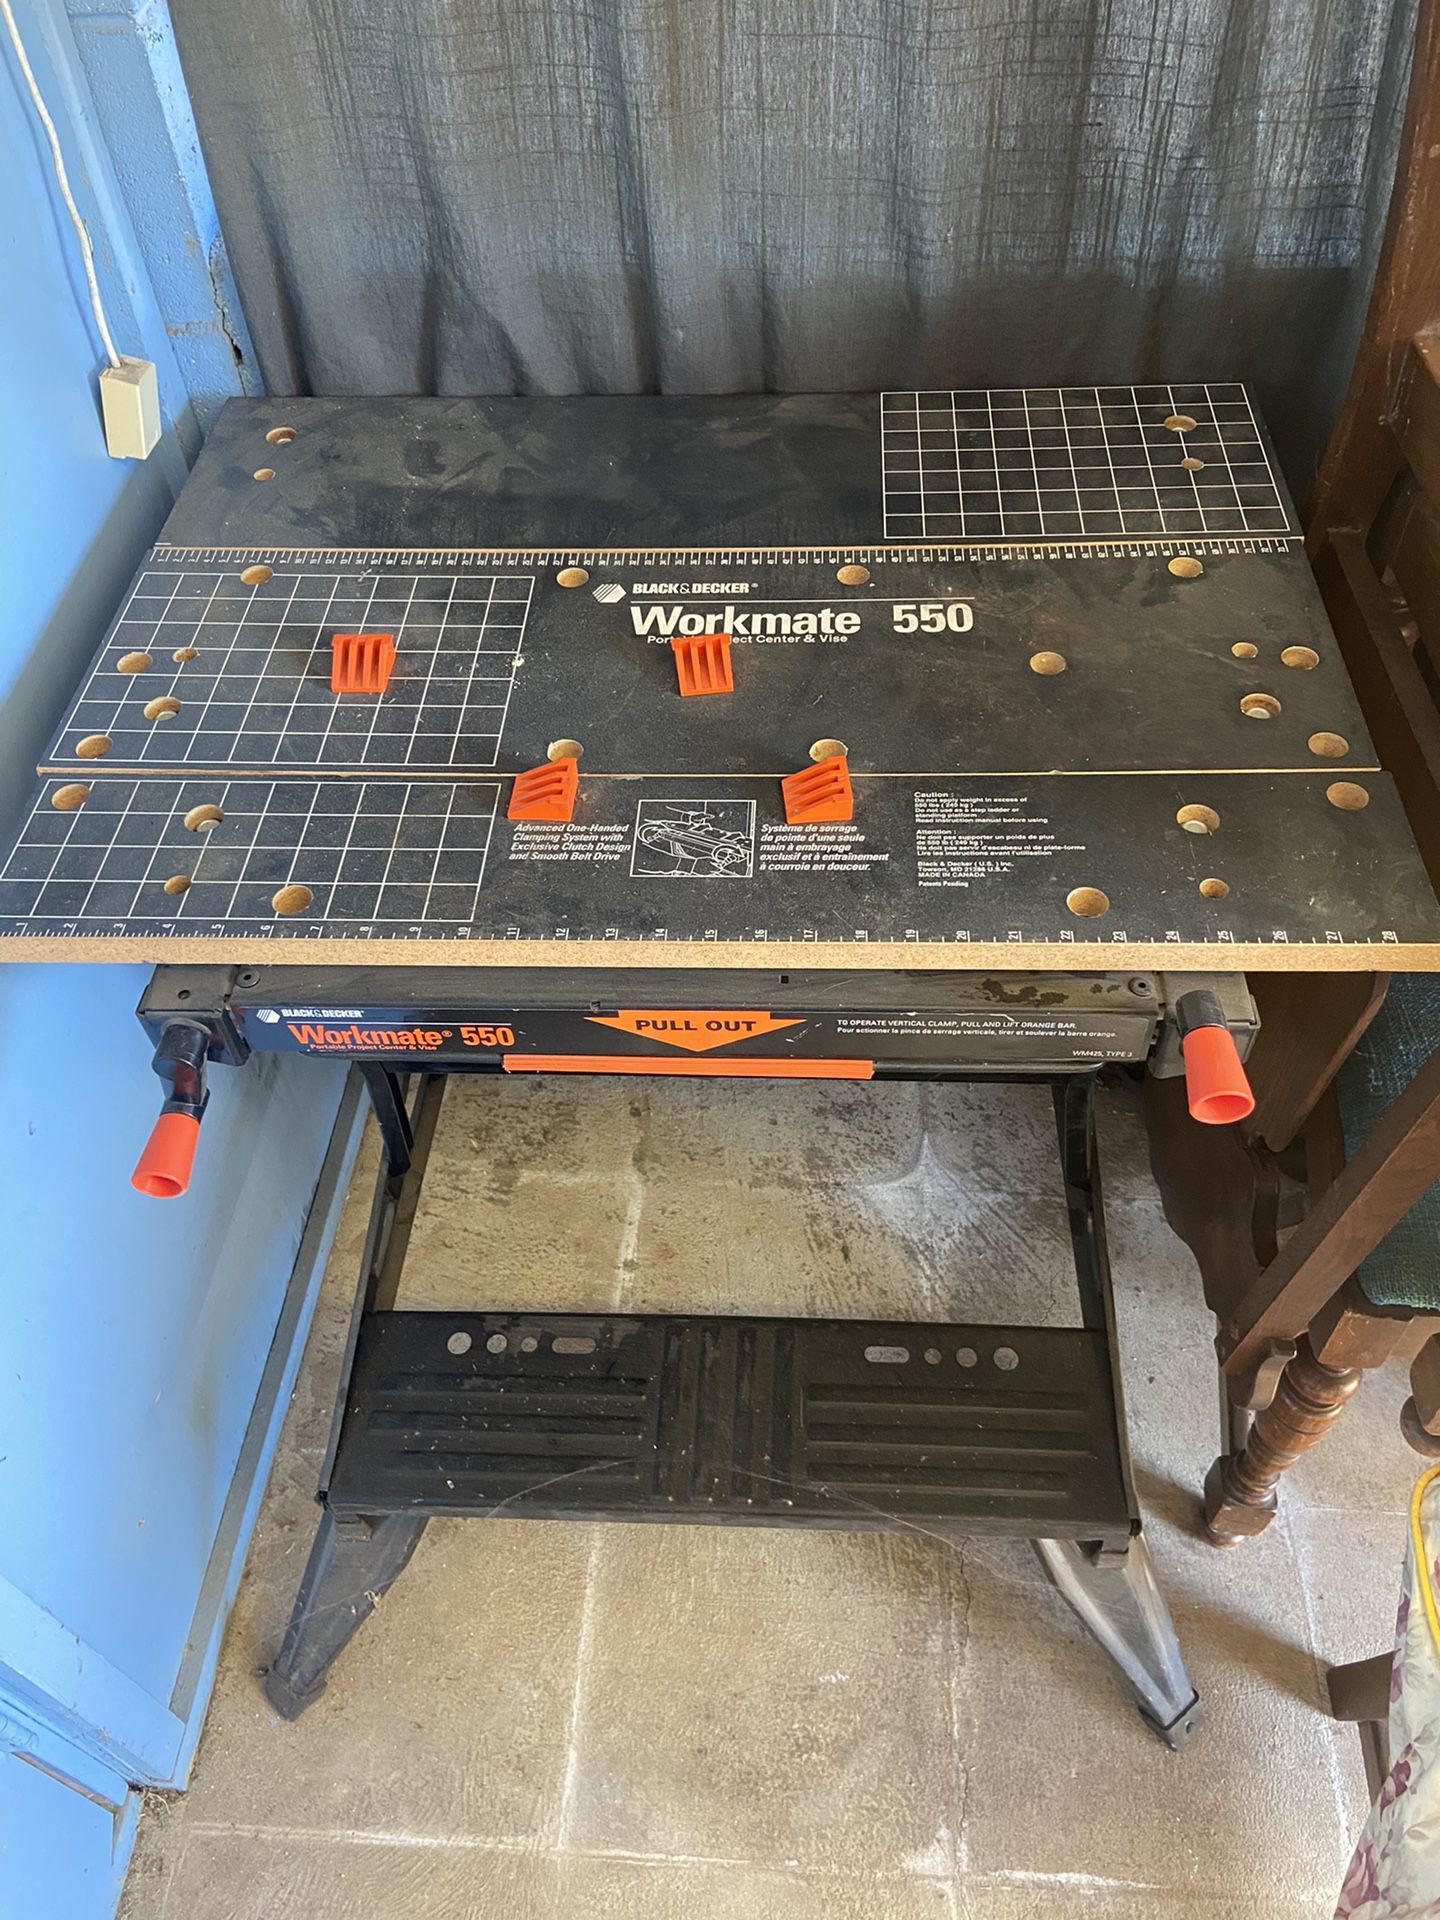 Black & Decker Workmate 550 Portable Work Table for Sale in San